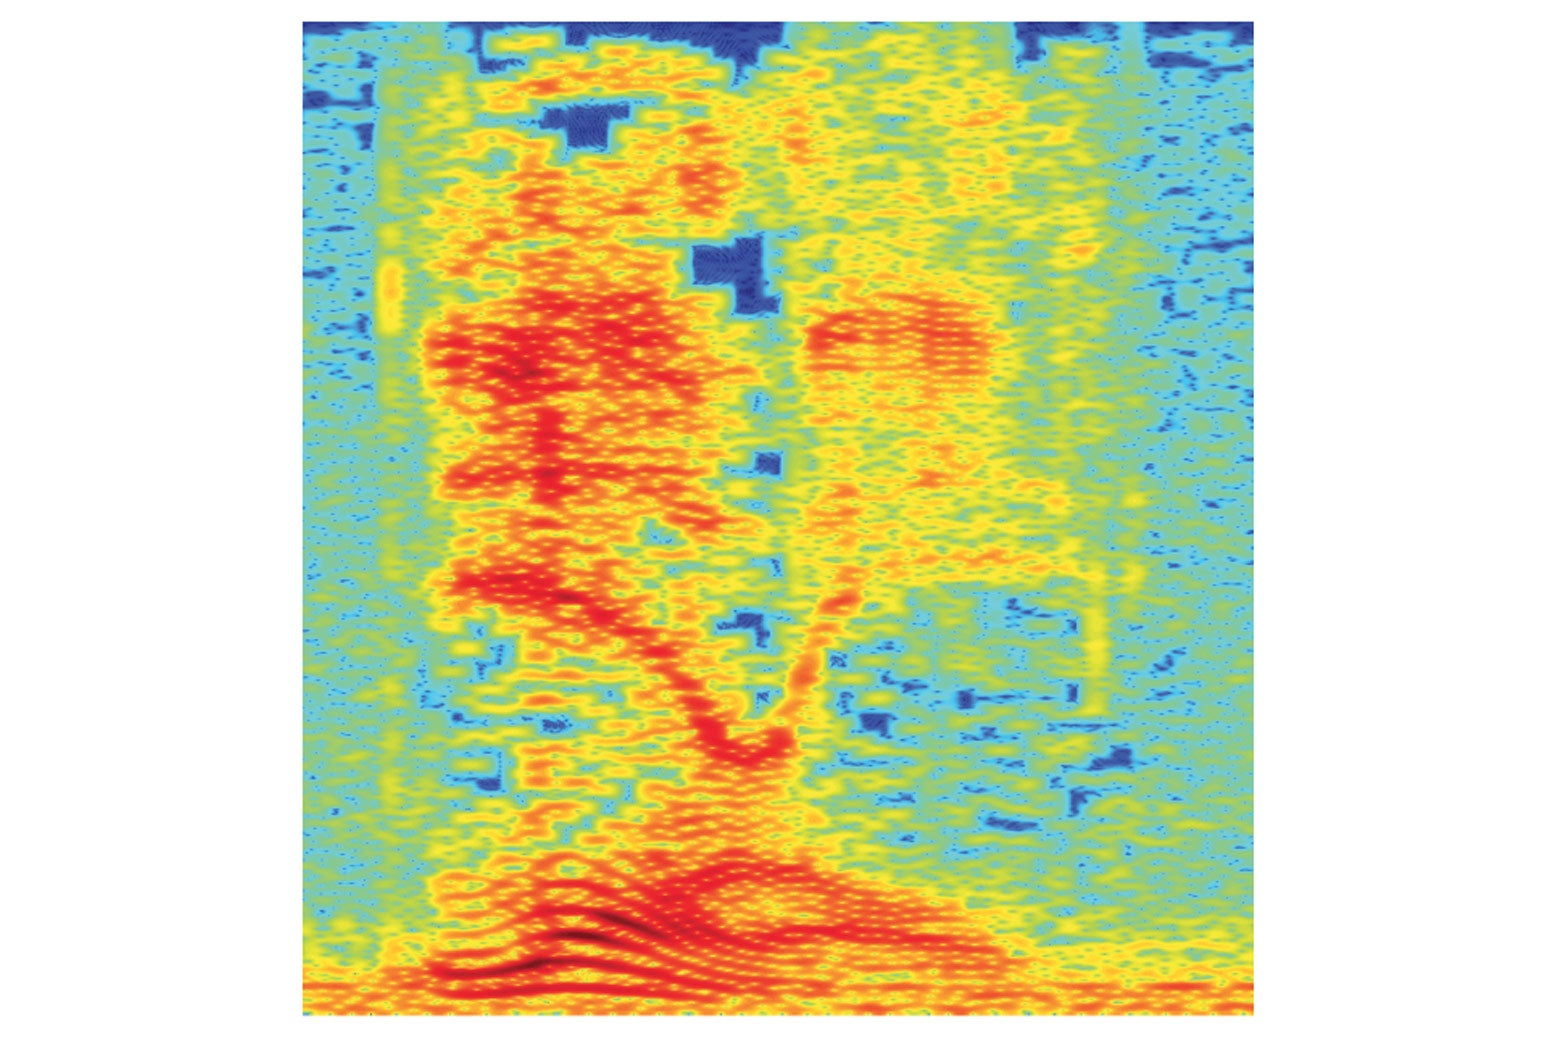 A spectrogram of the audio.